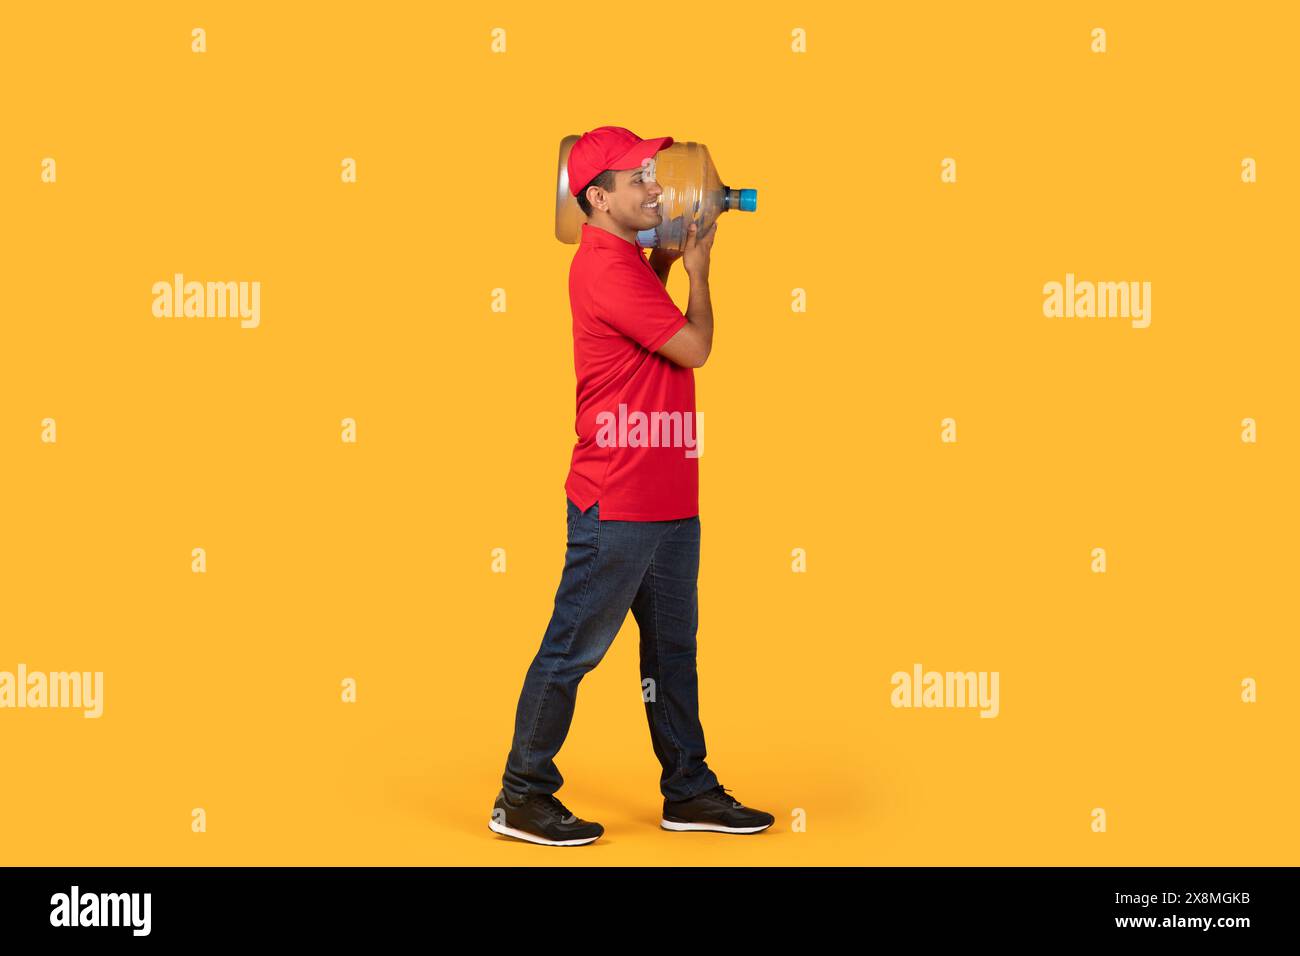 Man Carrying Water Gallon Against Yellow Background in Studio Setting Stock Photo